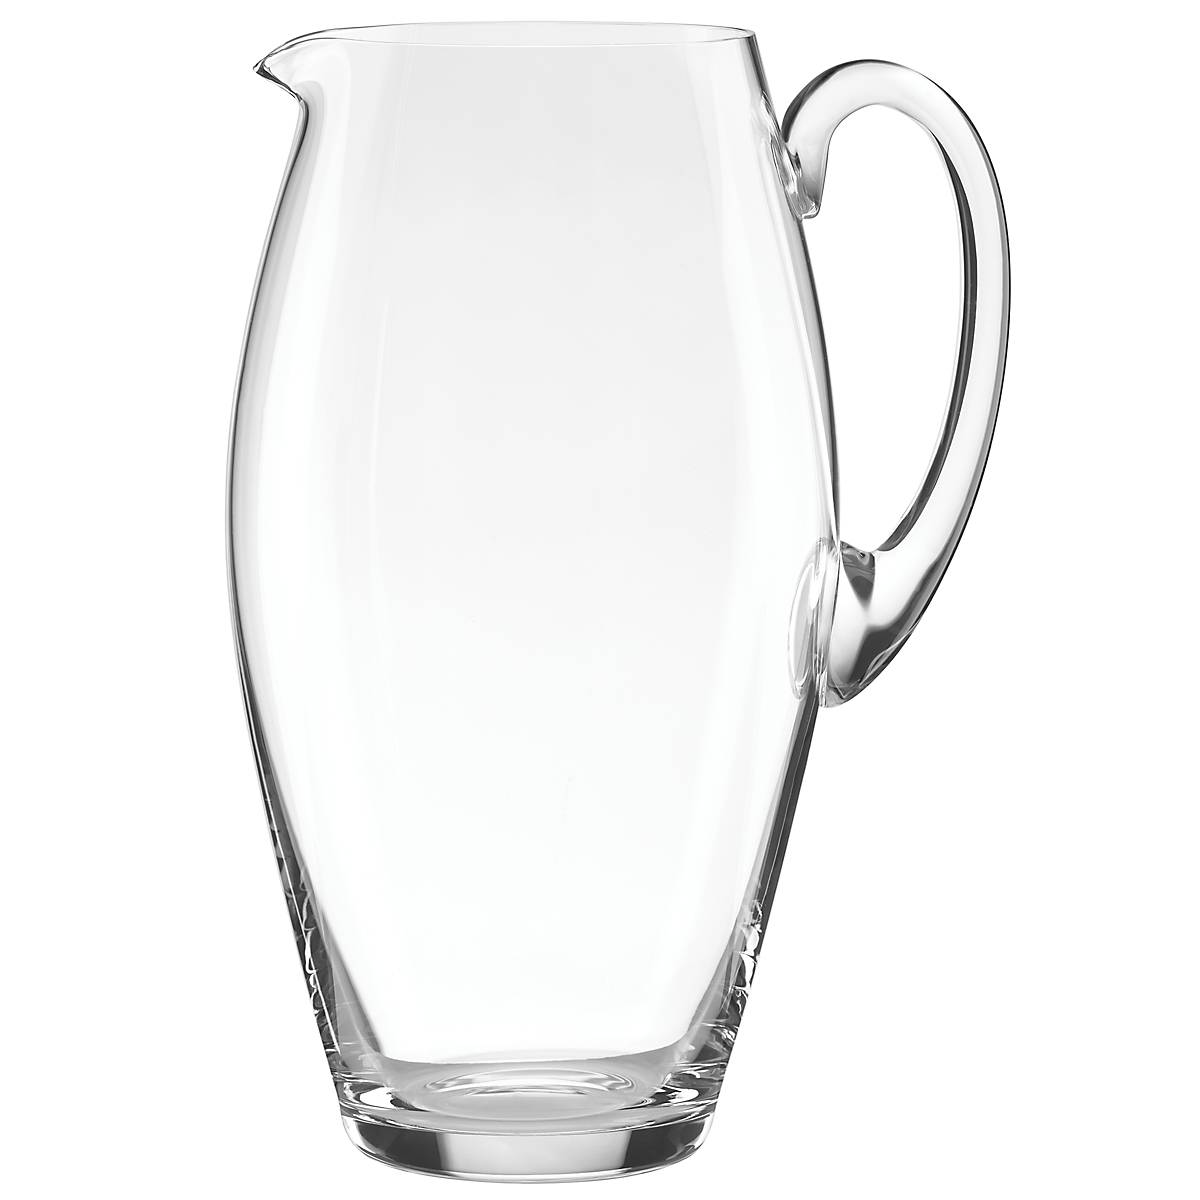 Choice Designs – Large Tilted Glass Pitcher